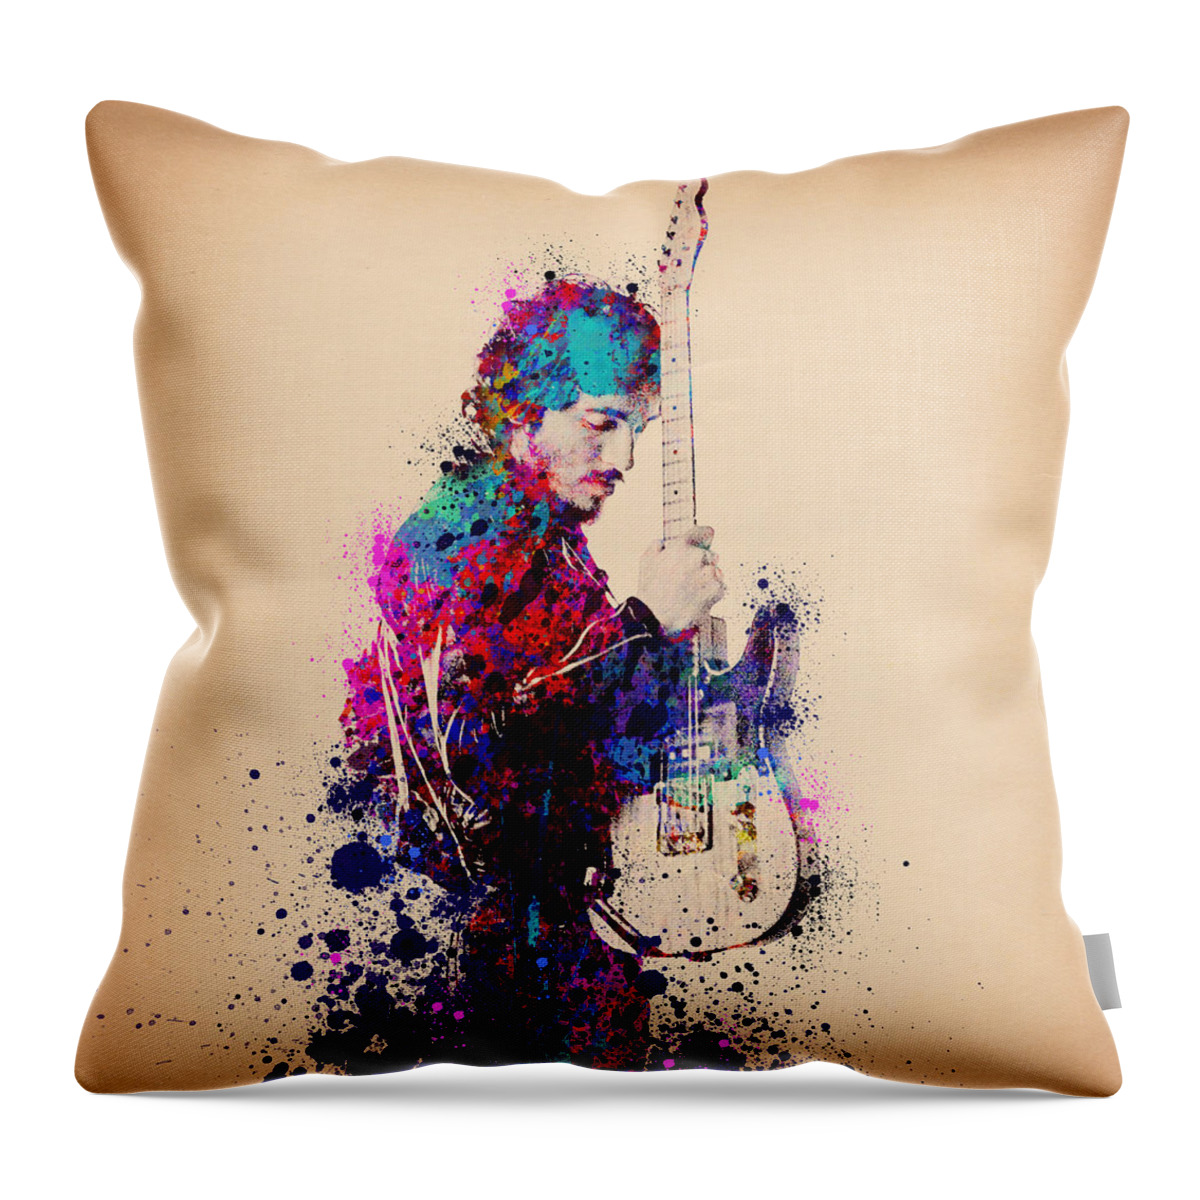 Music Throw Pillow featuring the painting Bruce Springsteen Splats And Guitar by Bekim M